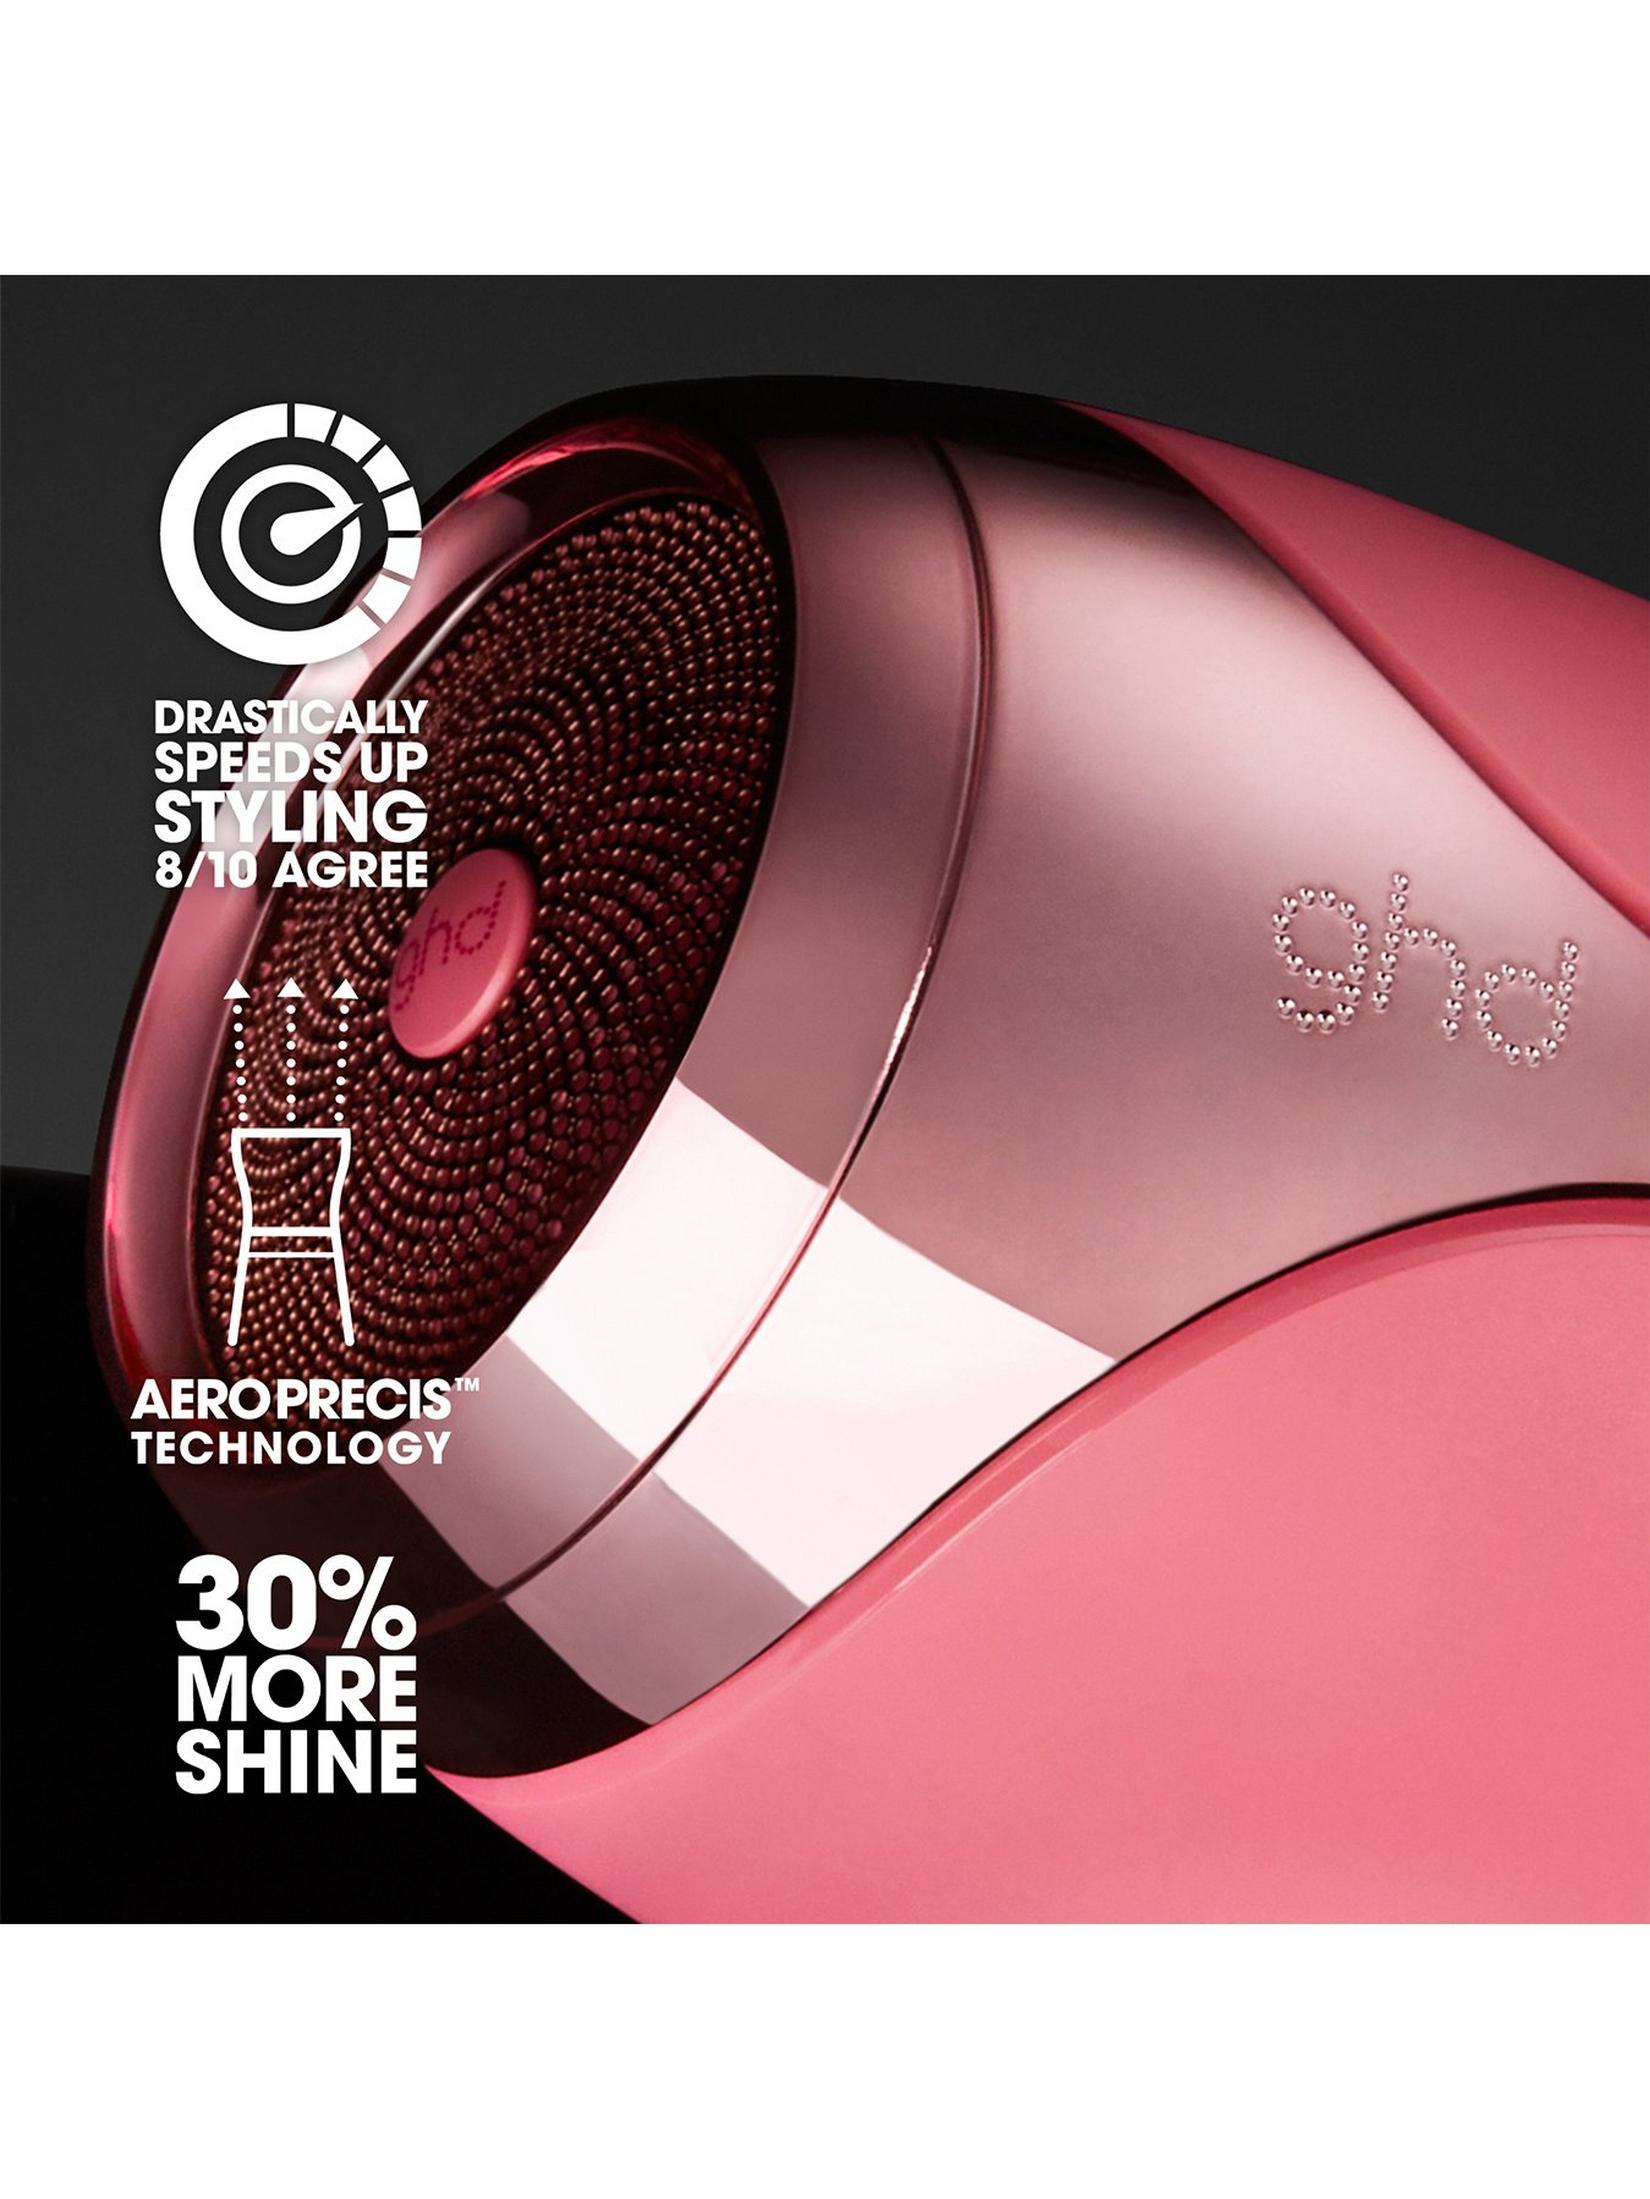 GHD Helios Hair Dryer Limited Edition - Rose Pink